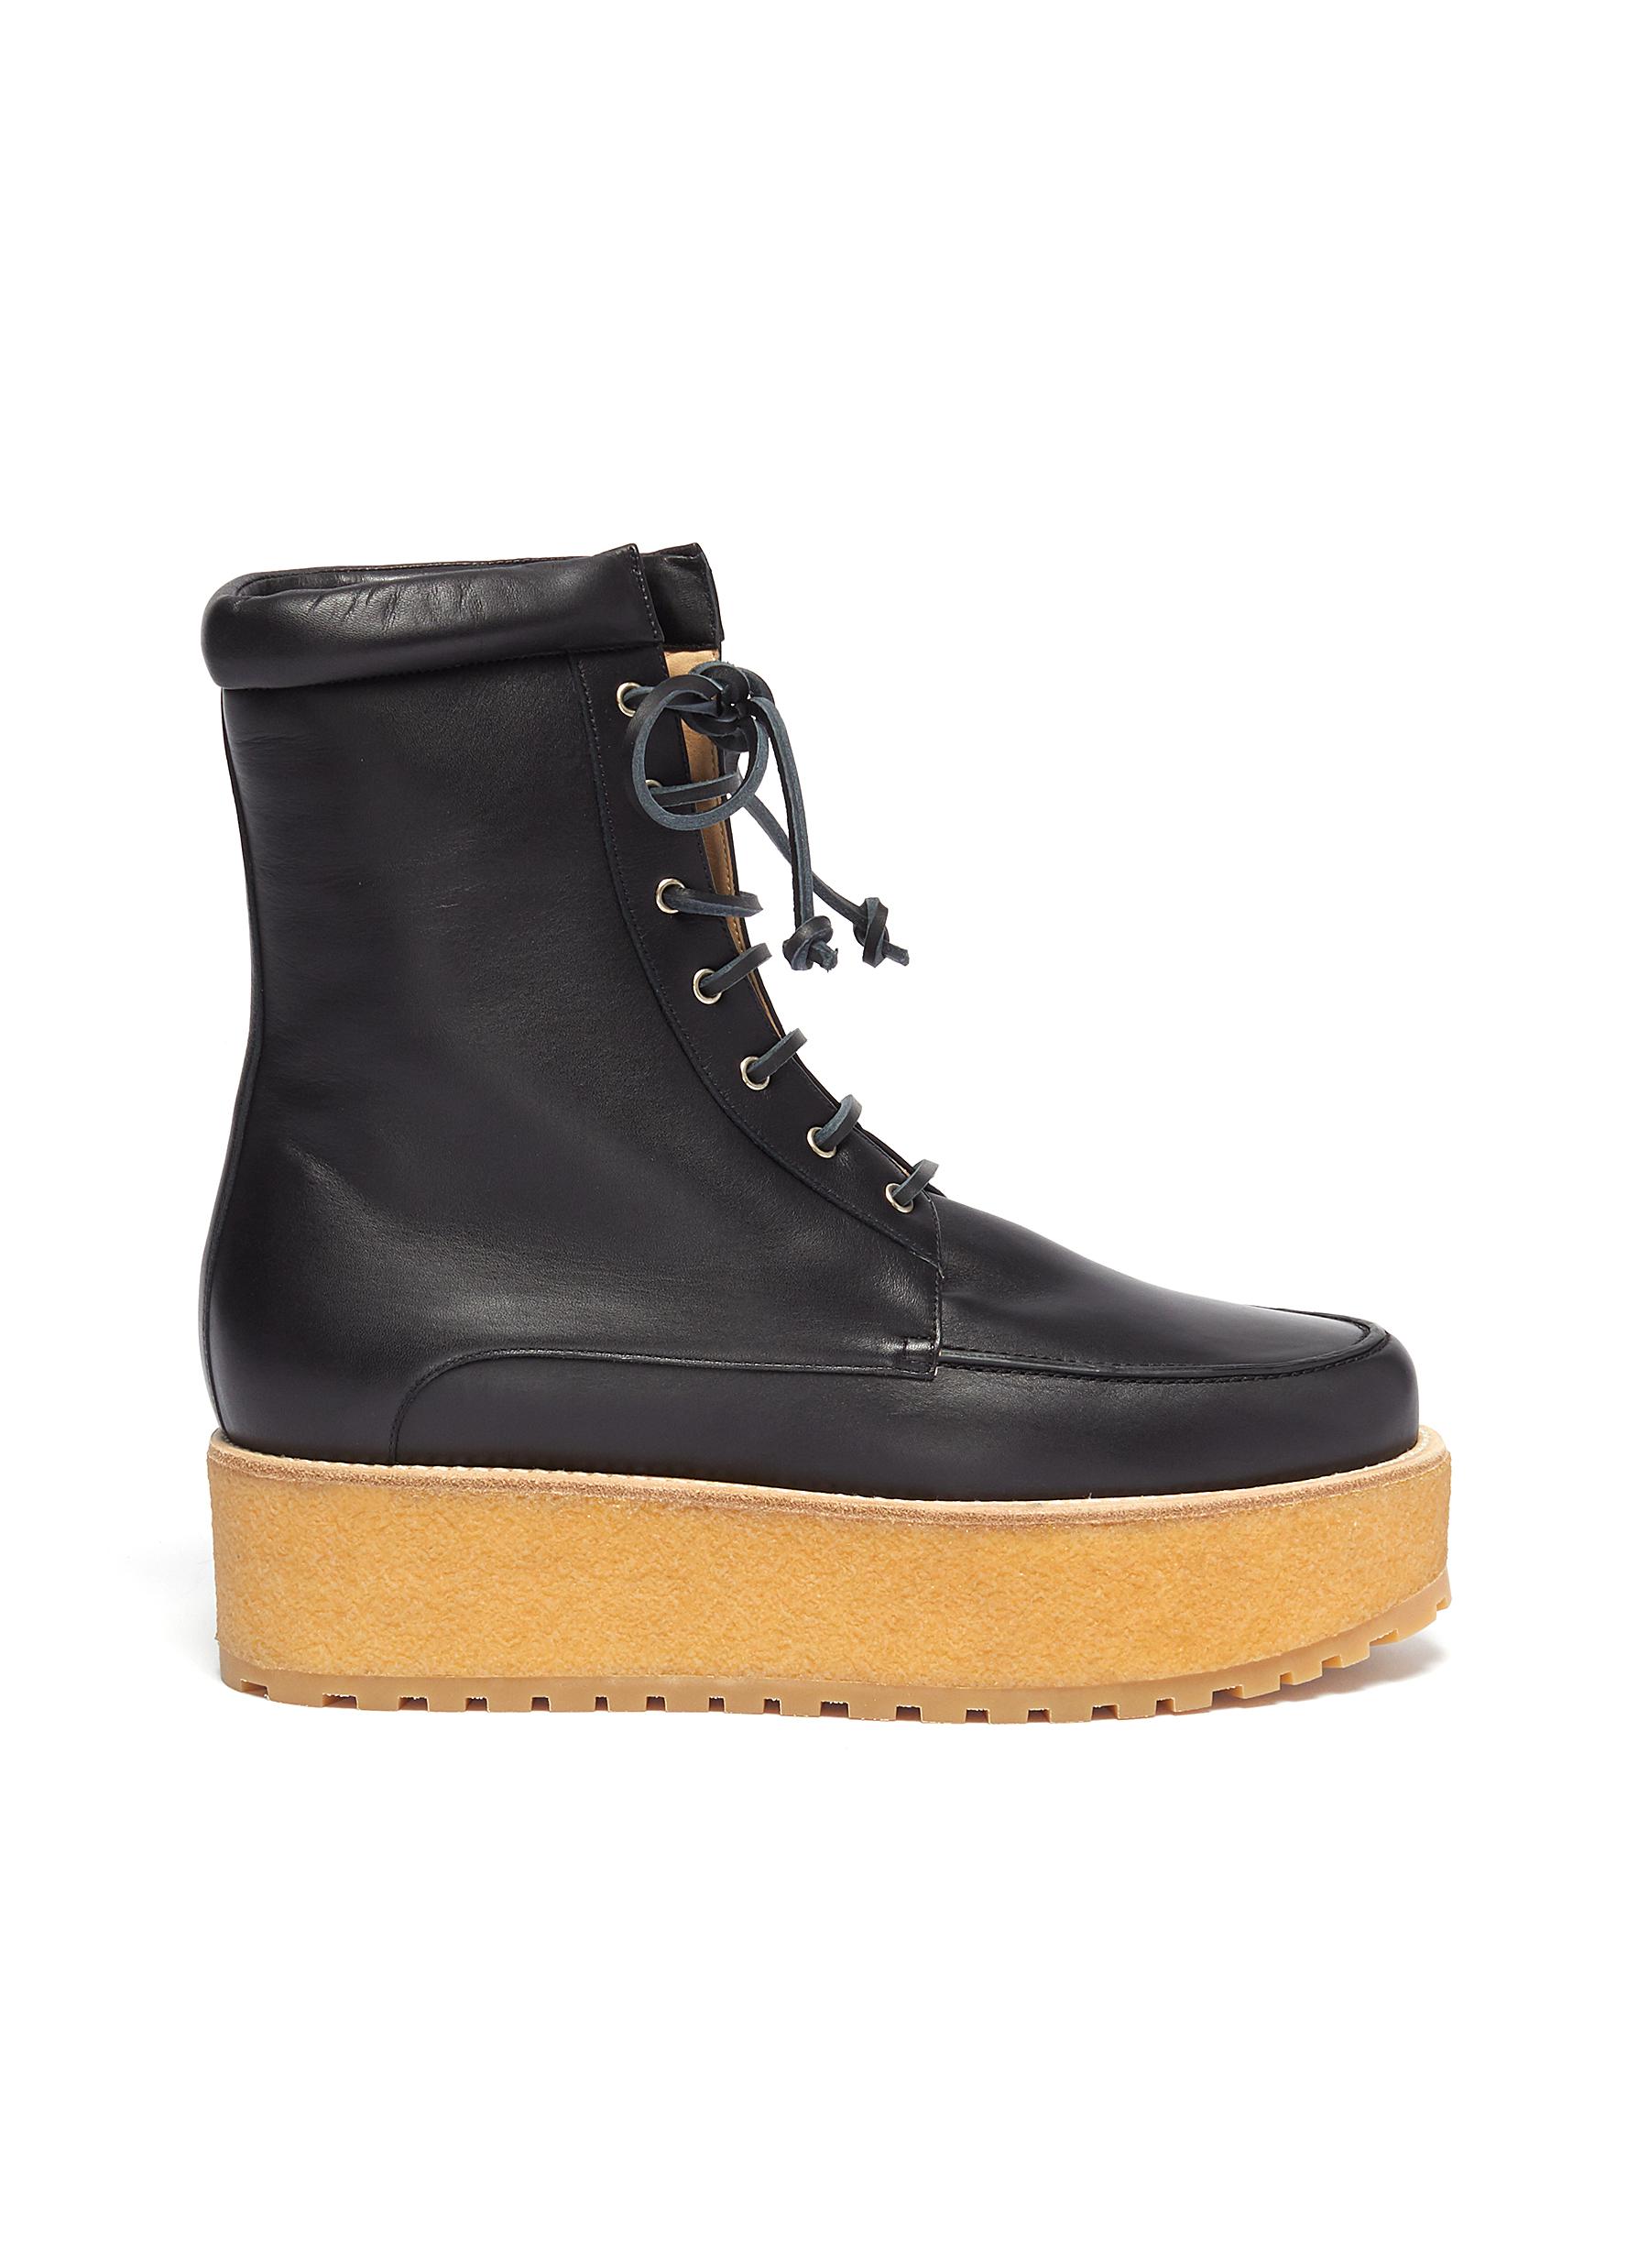 Leather lace up platform combat boots by Gabriela Hearst